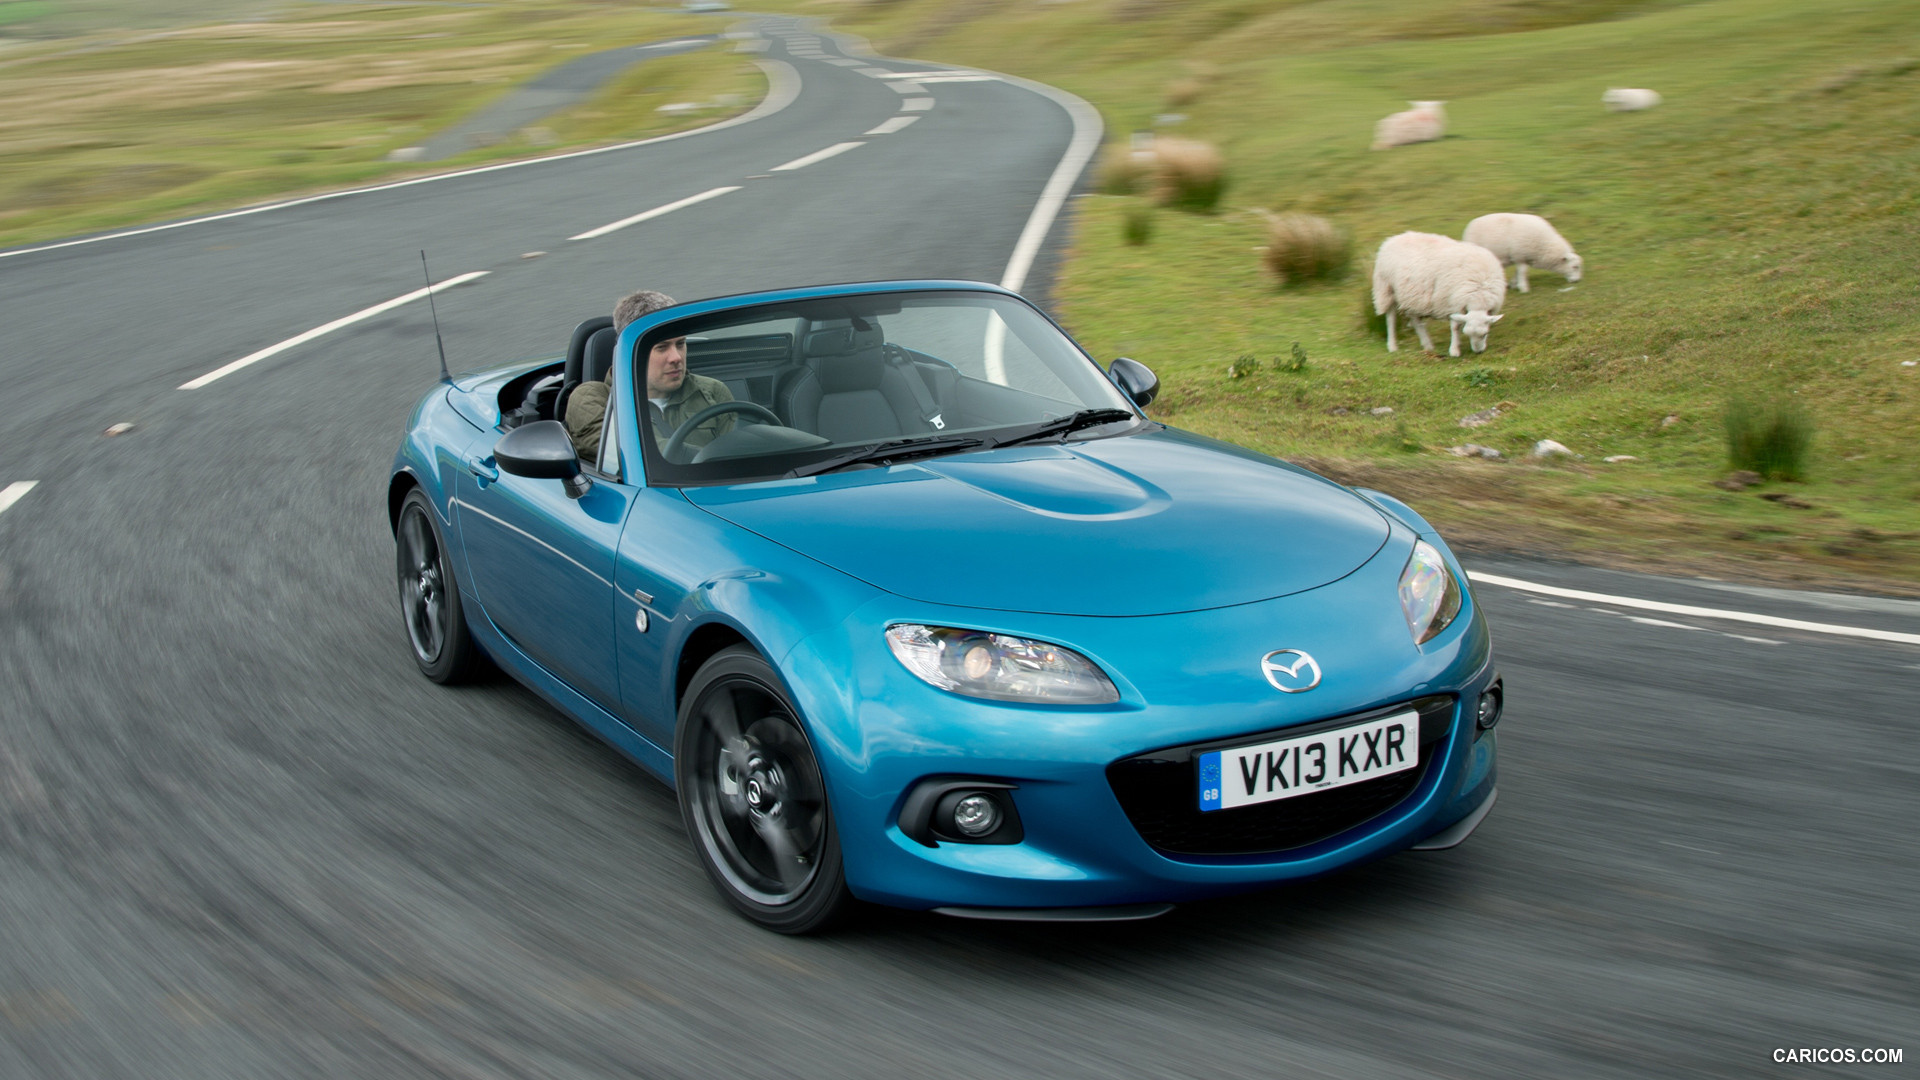 2013 Mazda MX-5 Sport Graphite Limited Edition  - Front, #2 of 8